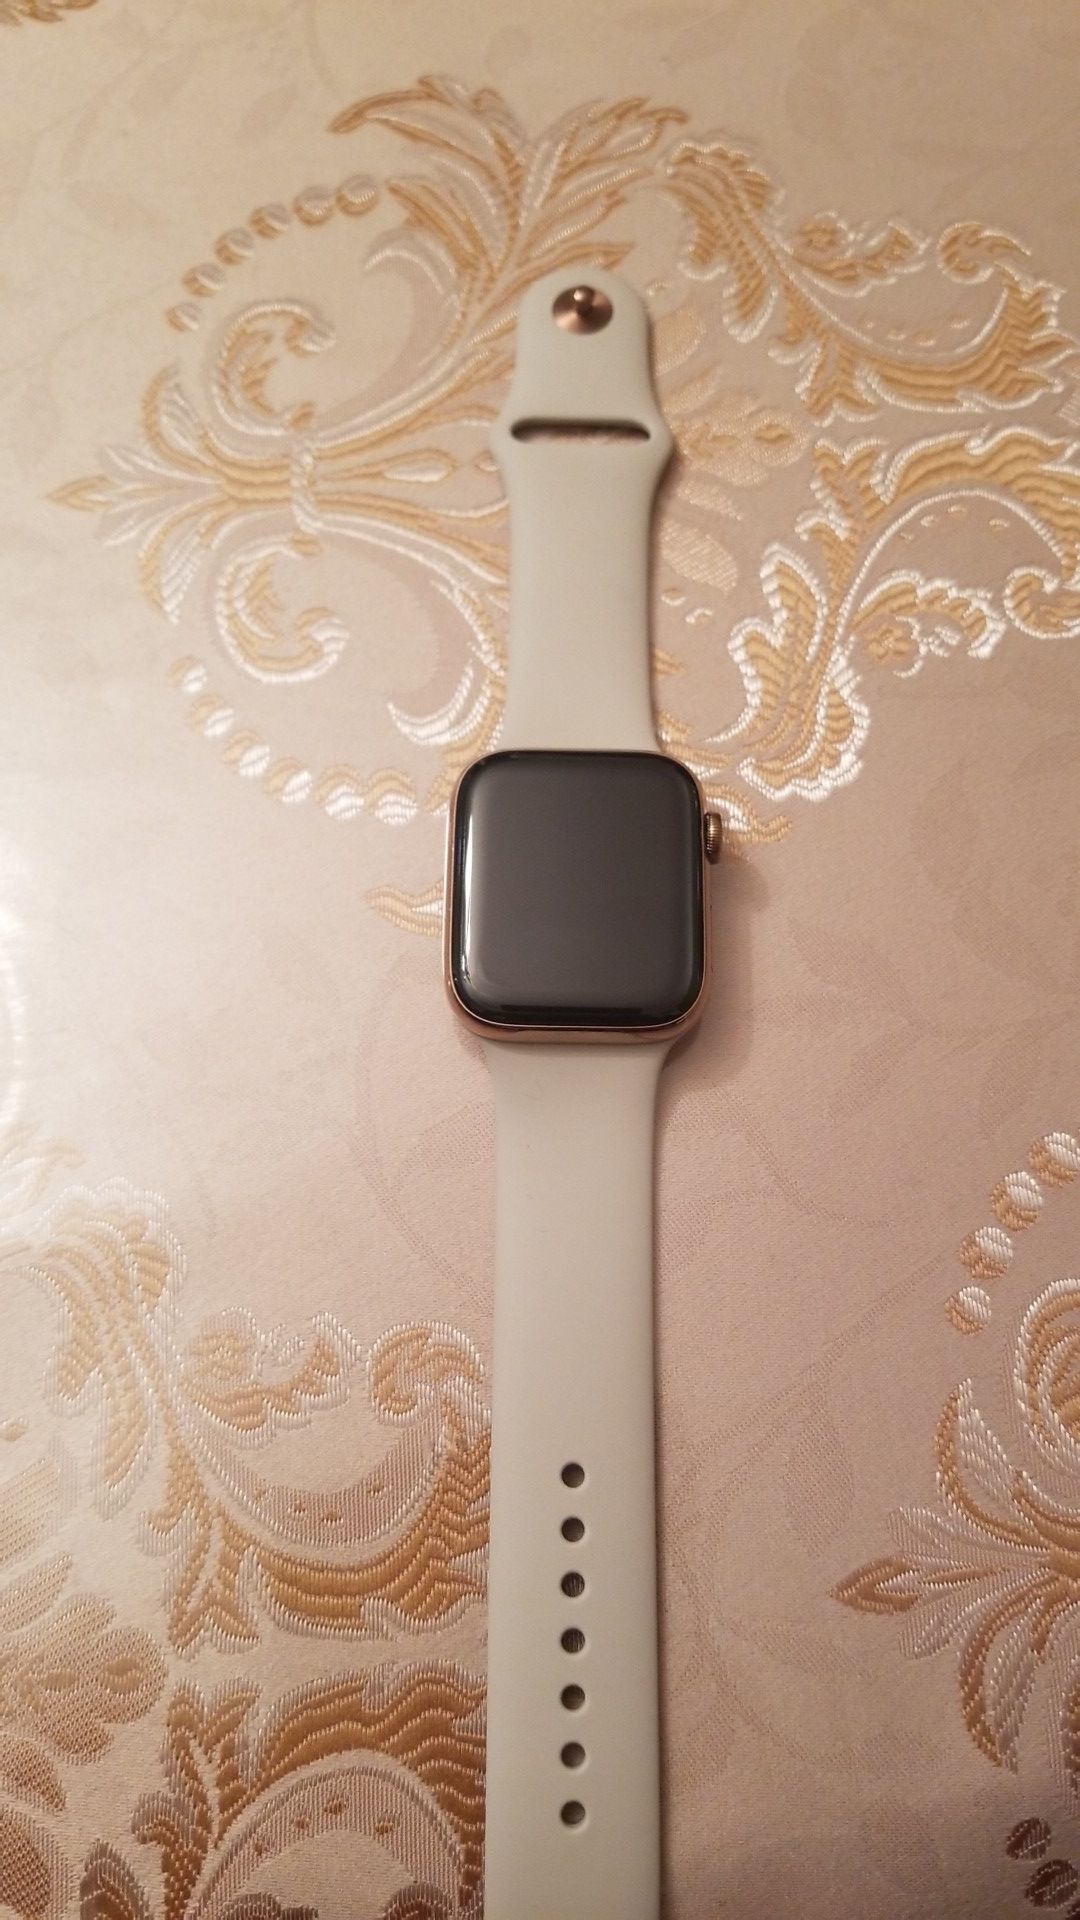 Apple series 4 GPS and cellular